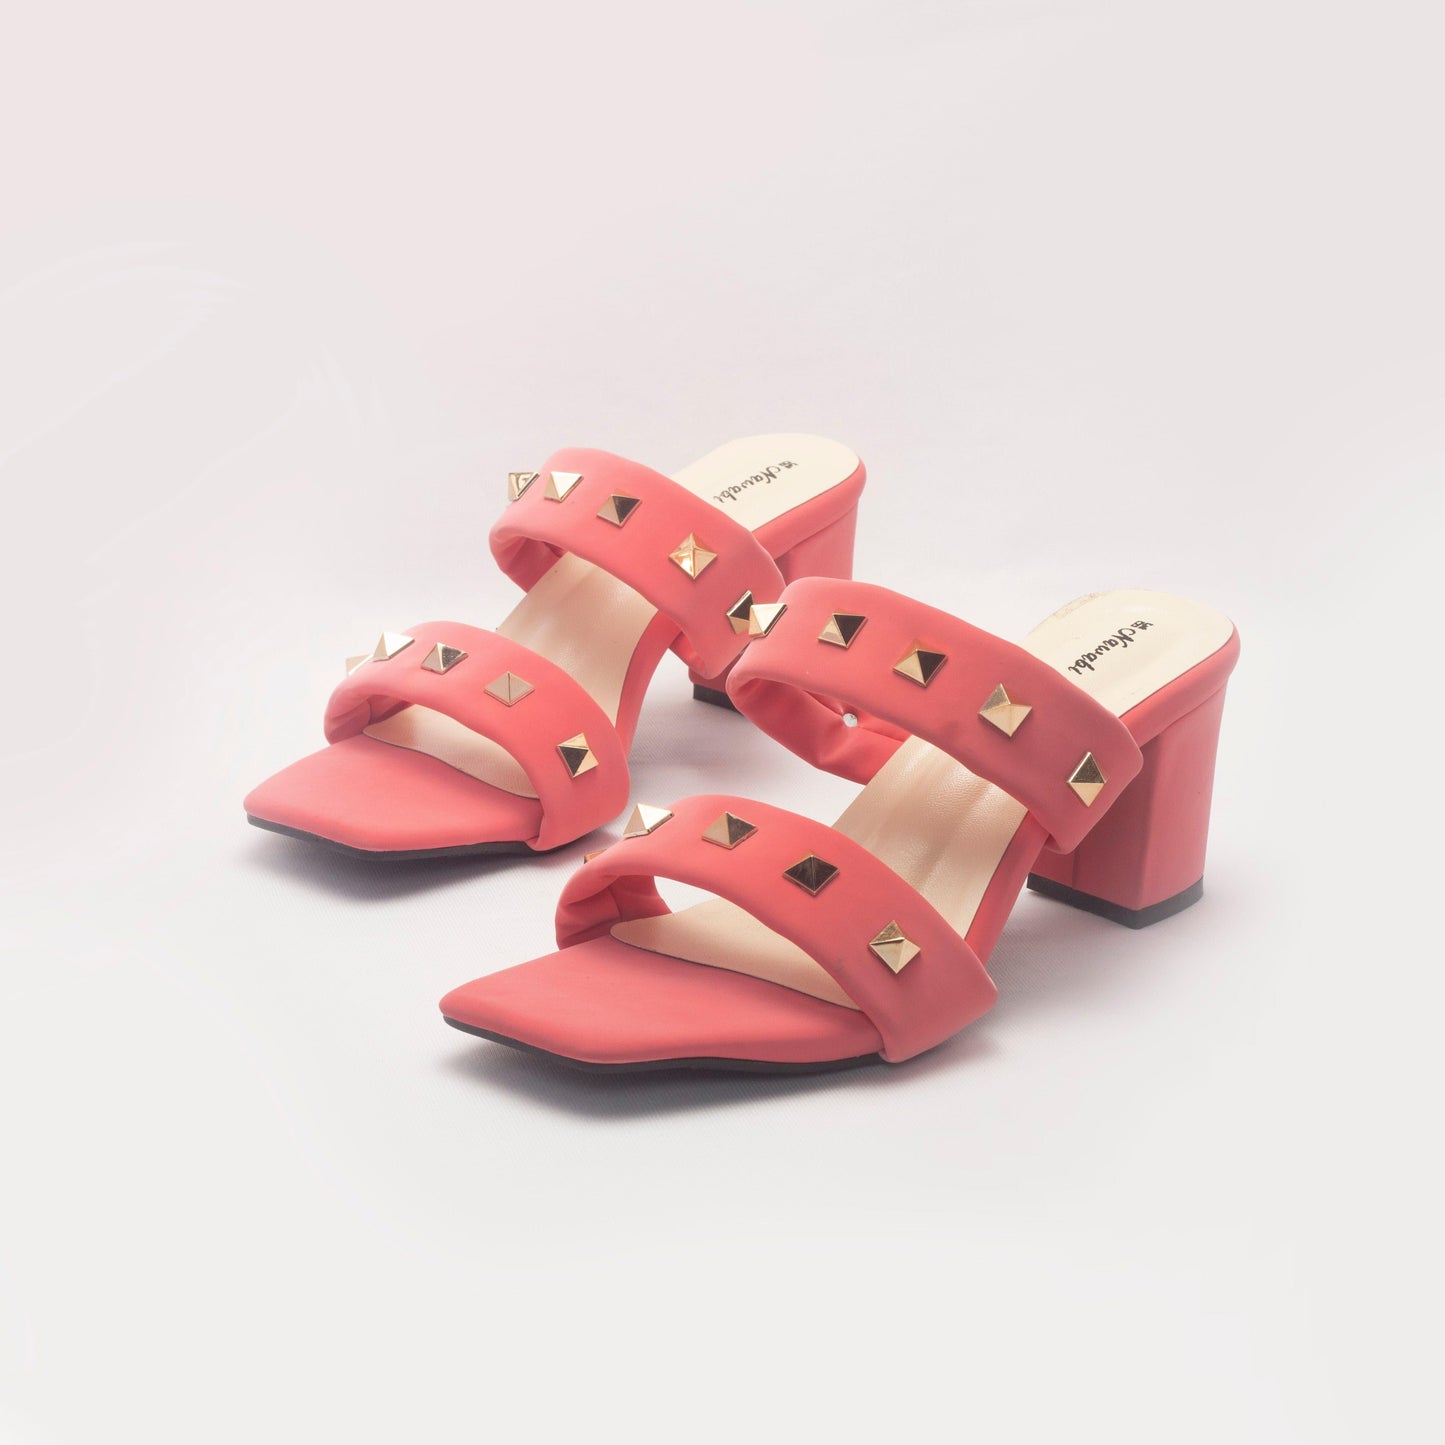 Nawabi Shoes BD Shoes 35 / lightcoral Stylish and Versatile: Block Heels for Any Occasion